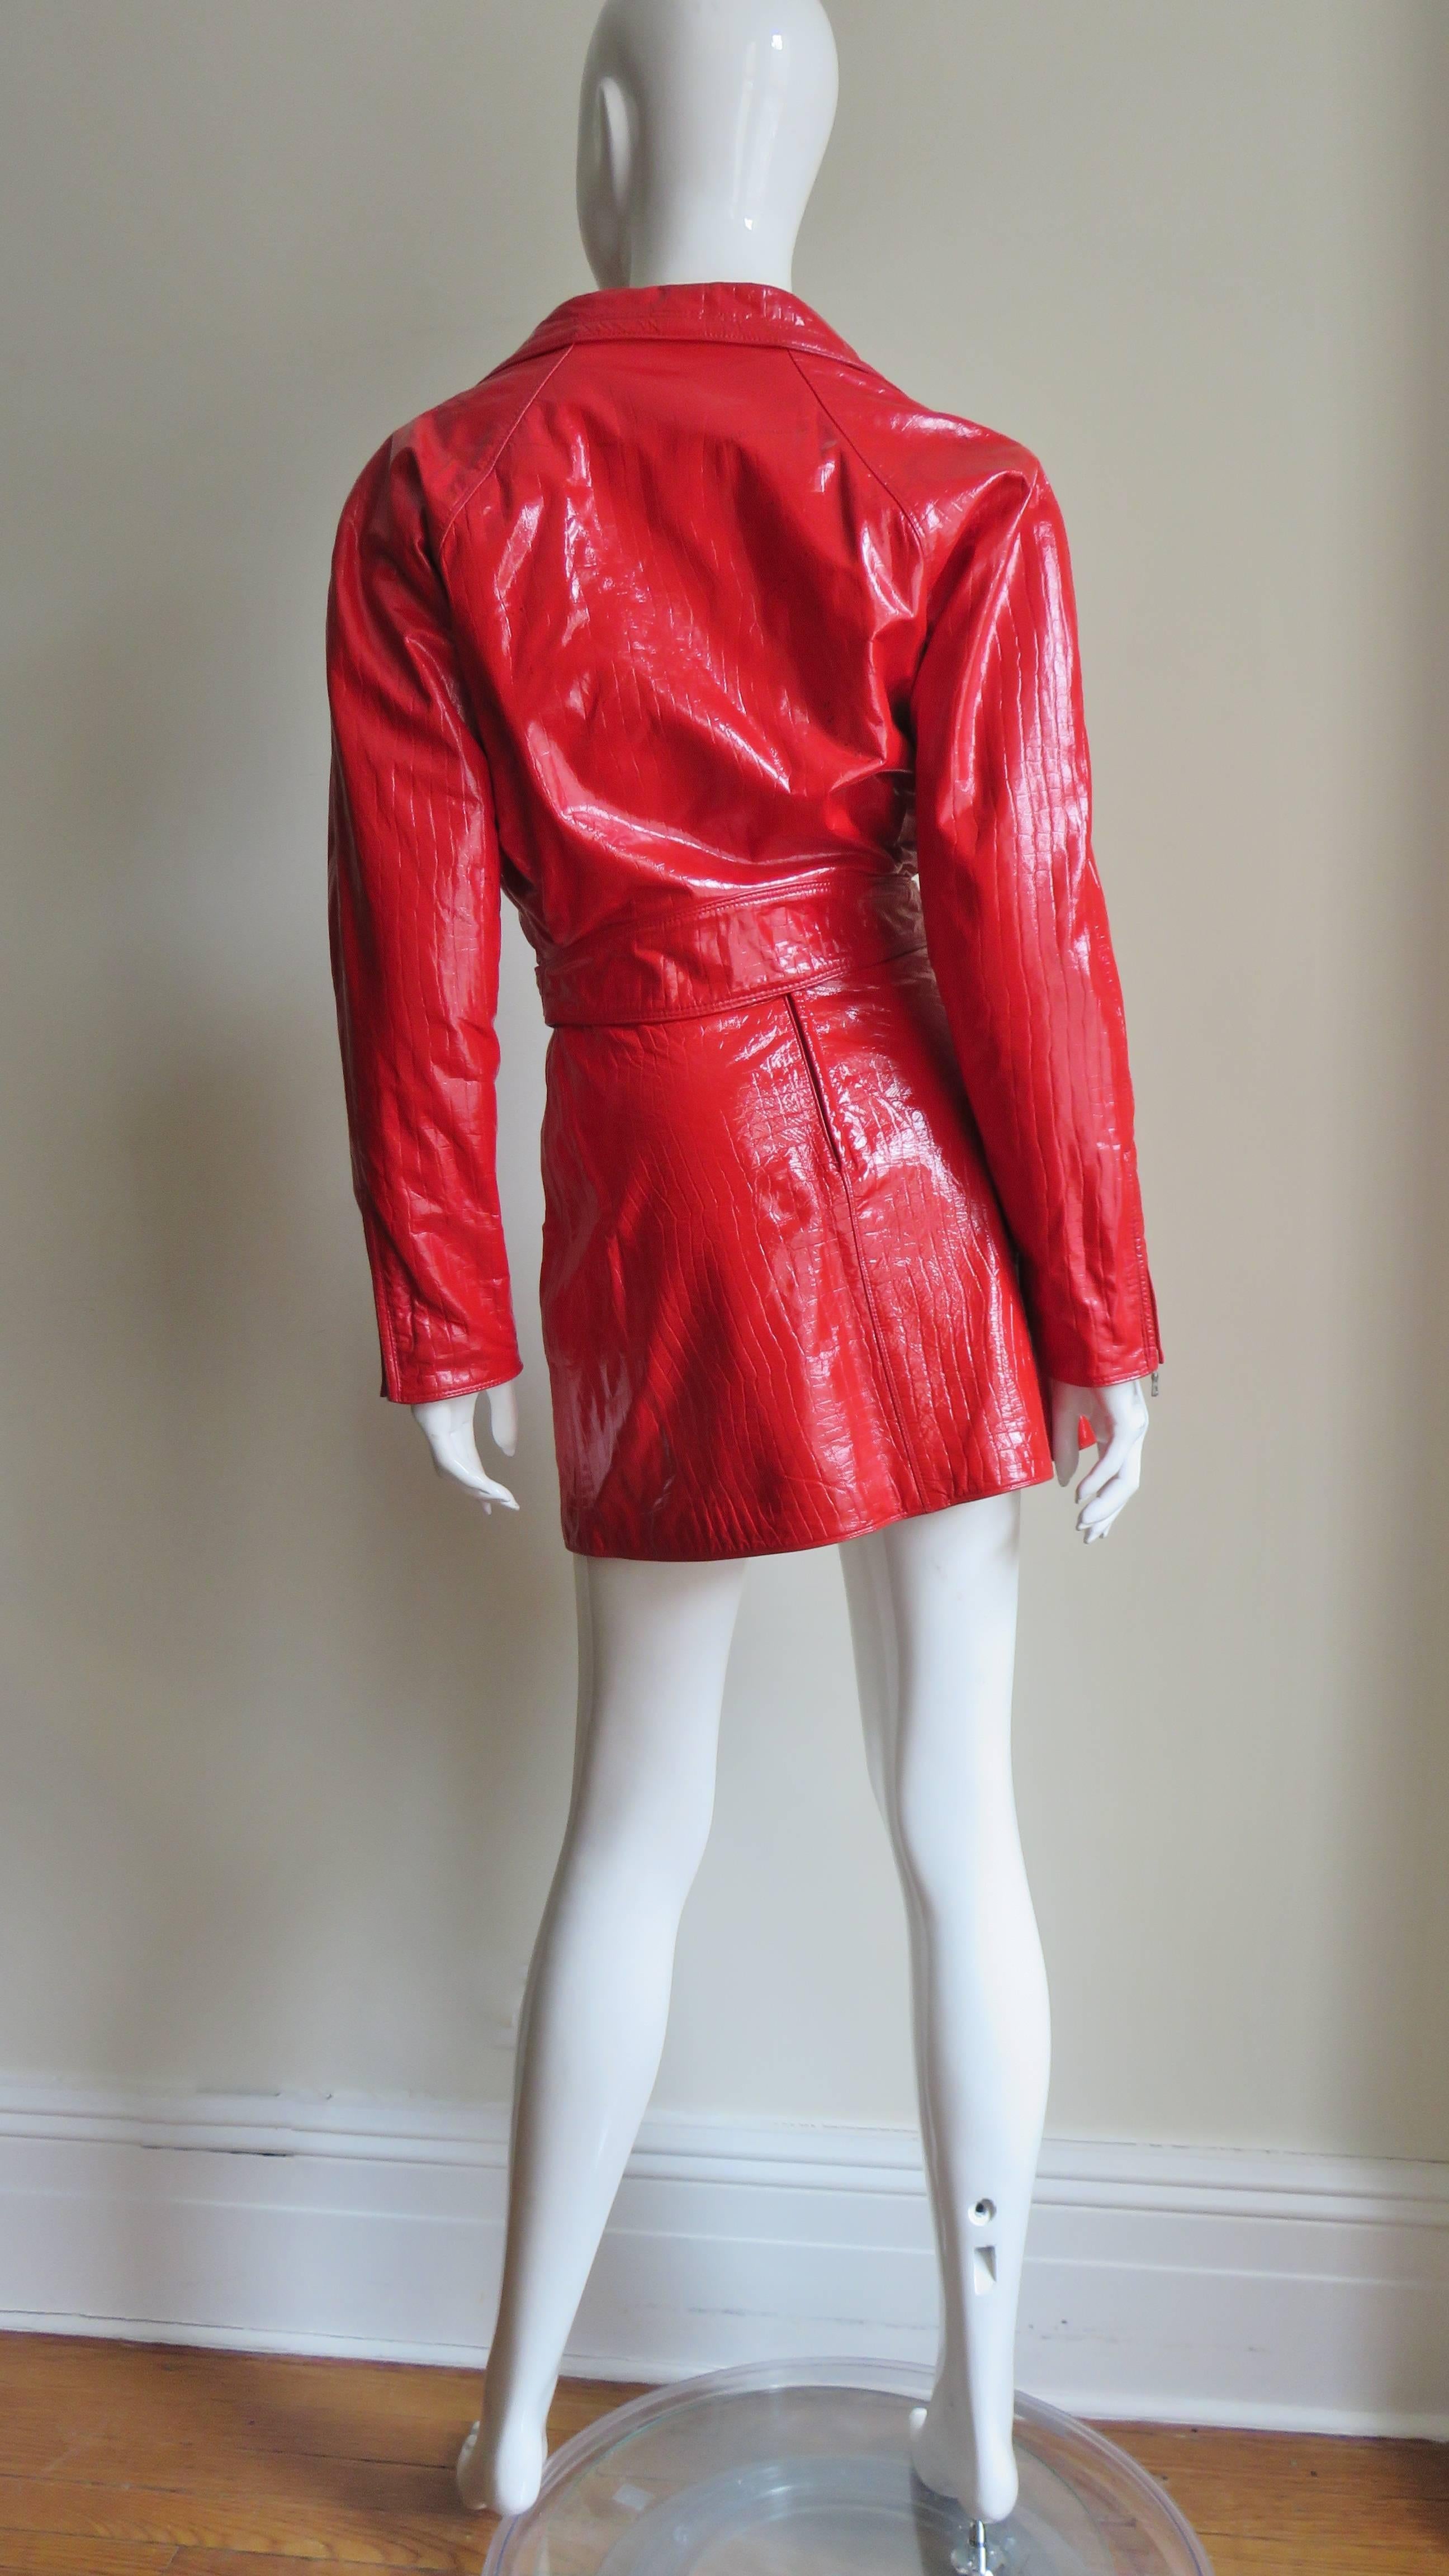 Gianni Versace Red Leather Motorcycle Jacket and Skirt A/W 1994 For Sale 4